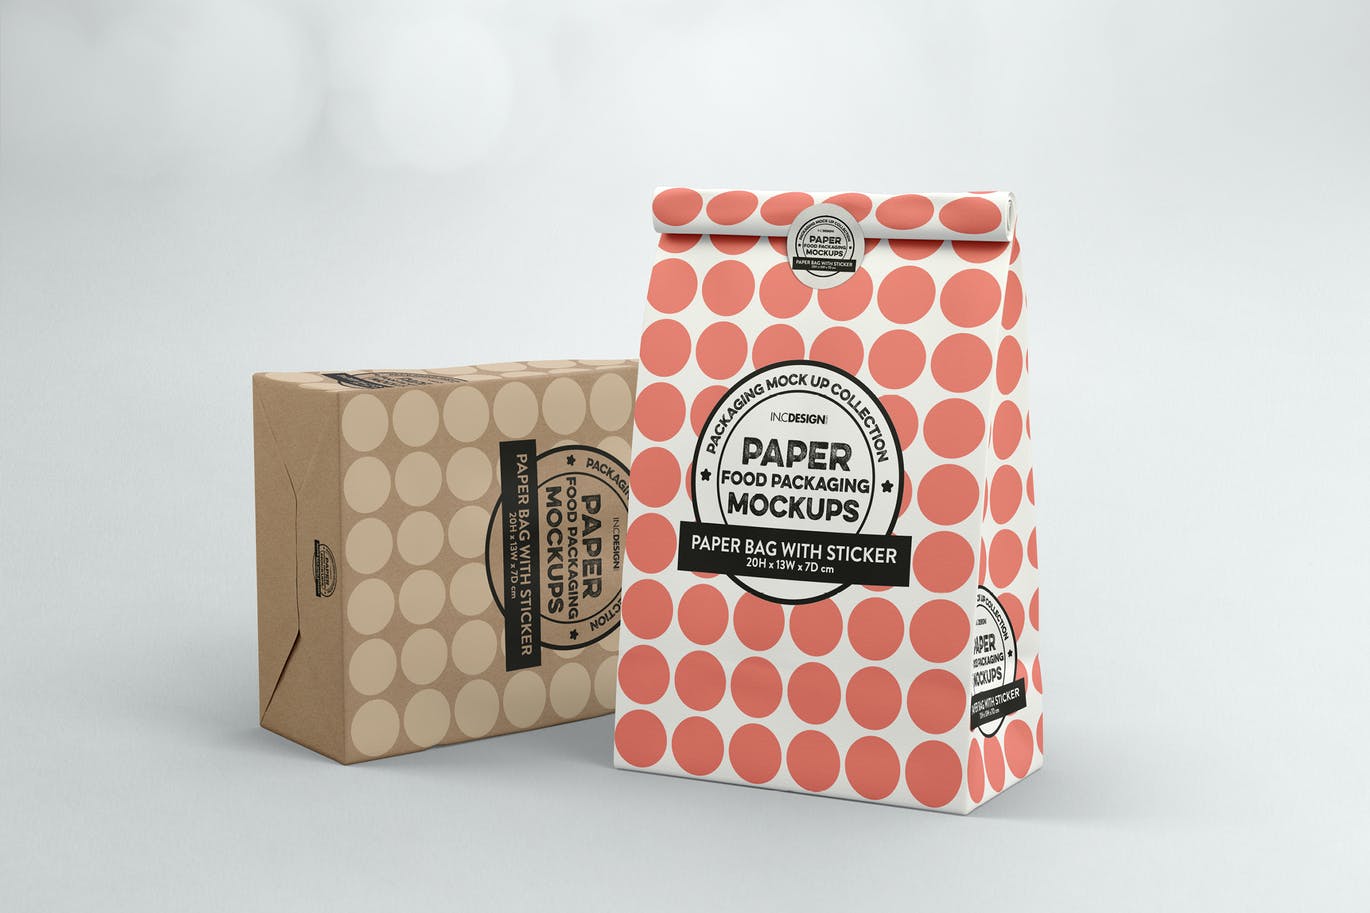 A paper bag with sticker seal mockup